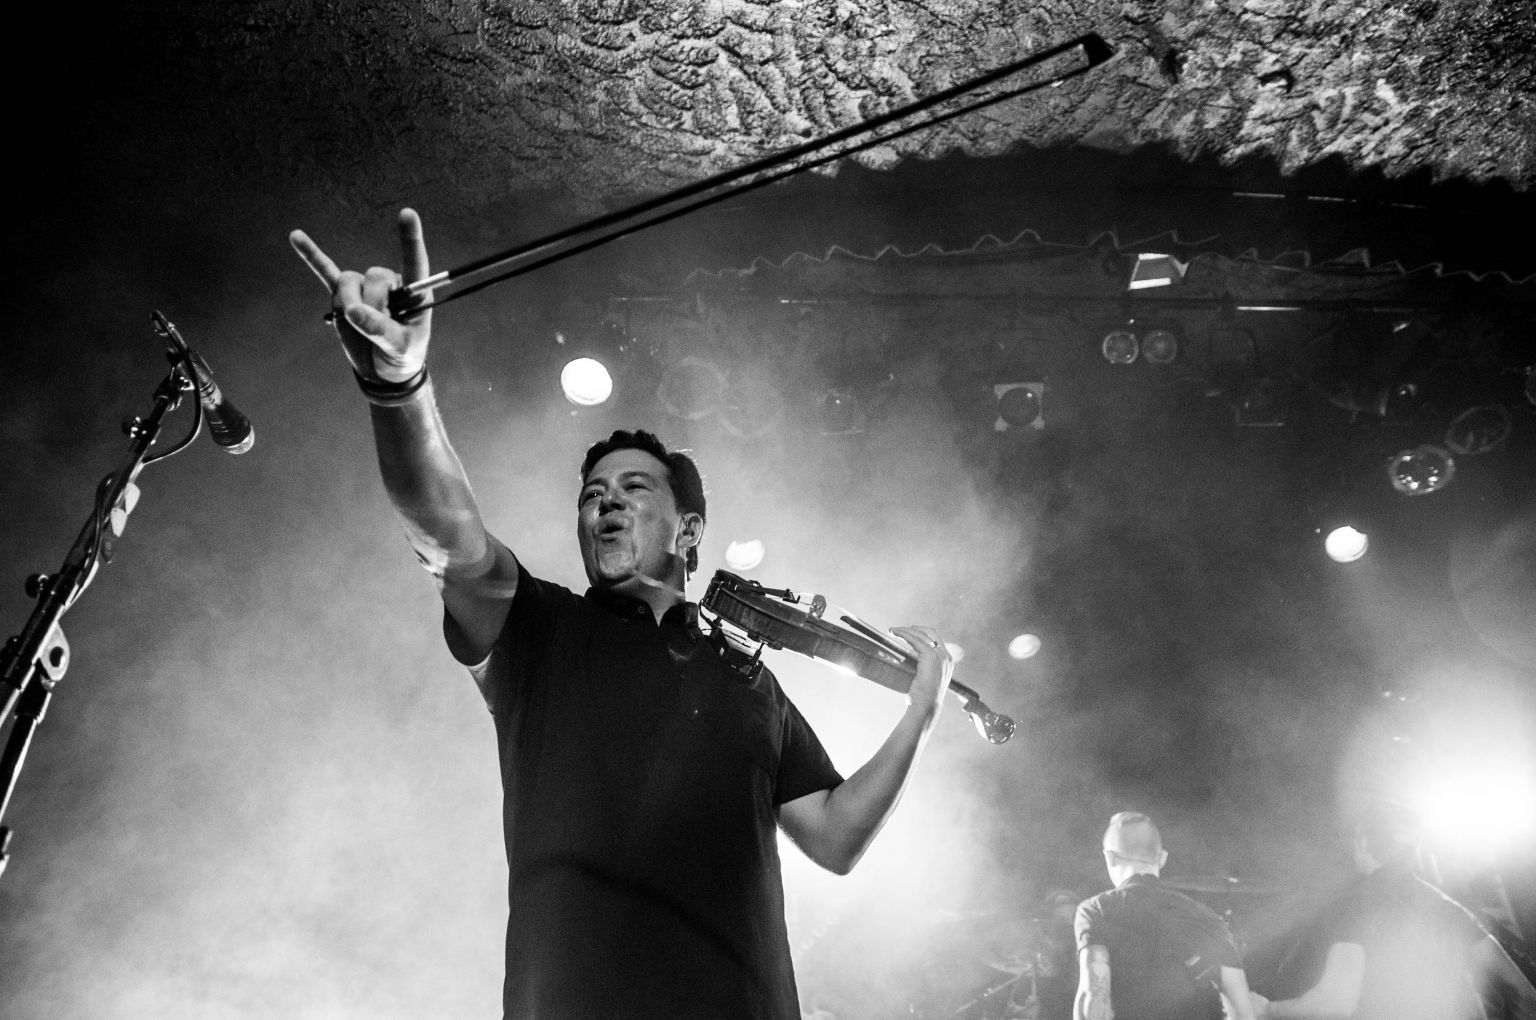 PHOTO GALLERY & REVIEW A Bittersweet Farewell to Yellowcard in Seattle